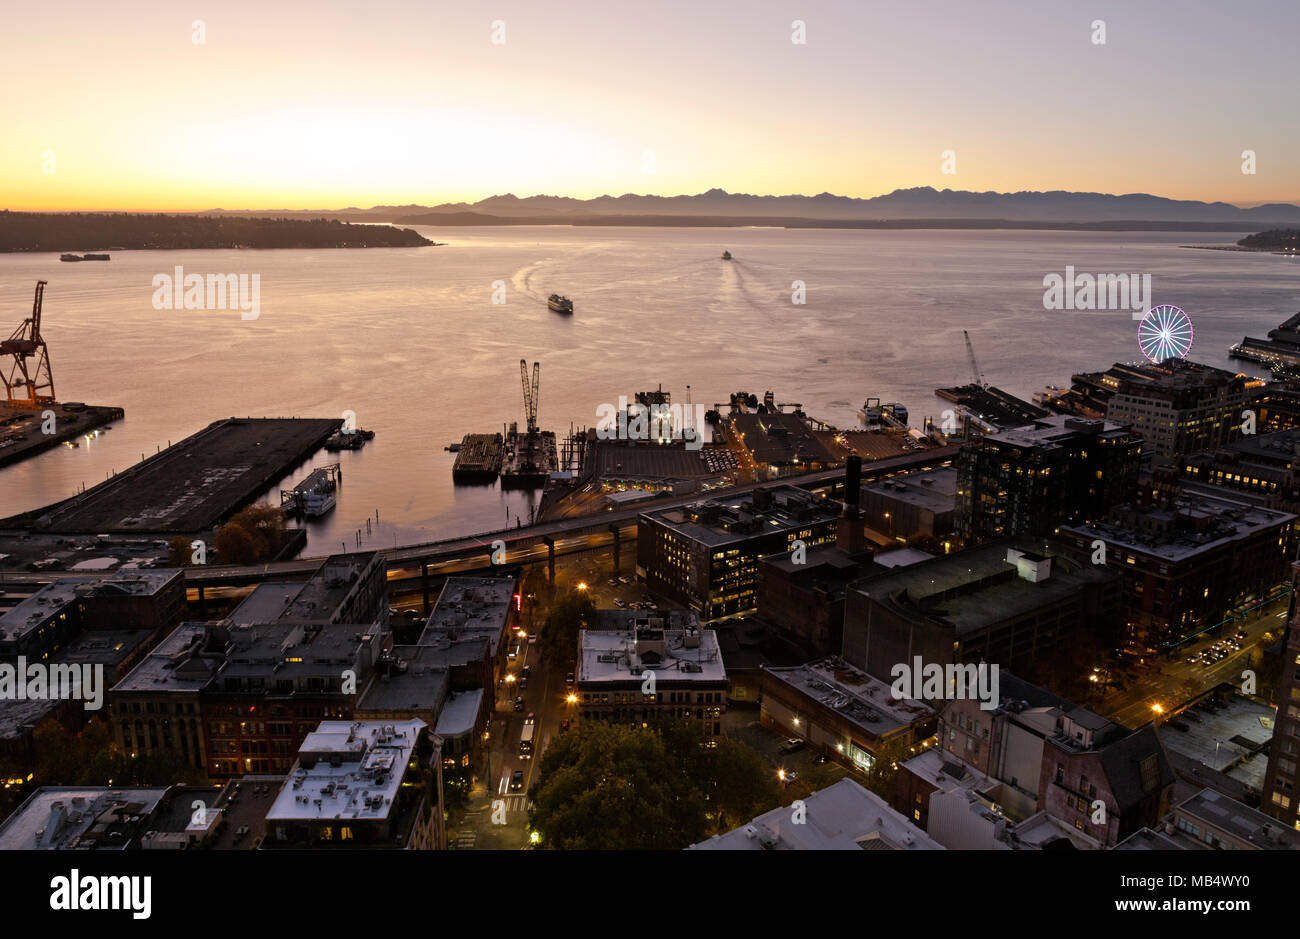 WASHINGTON - Ferries on Elliott Bay and Colman Dock after sunset over the Olympic Mtns from the Observation Deck on Seattle's Smith Tower. 2017 Stock Photo